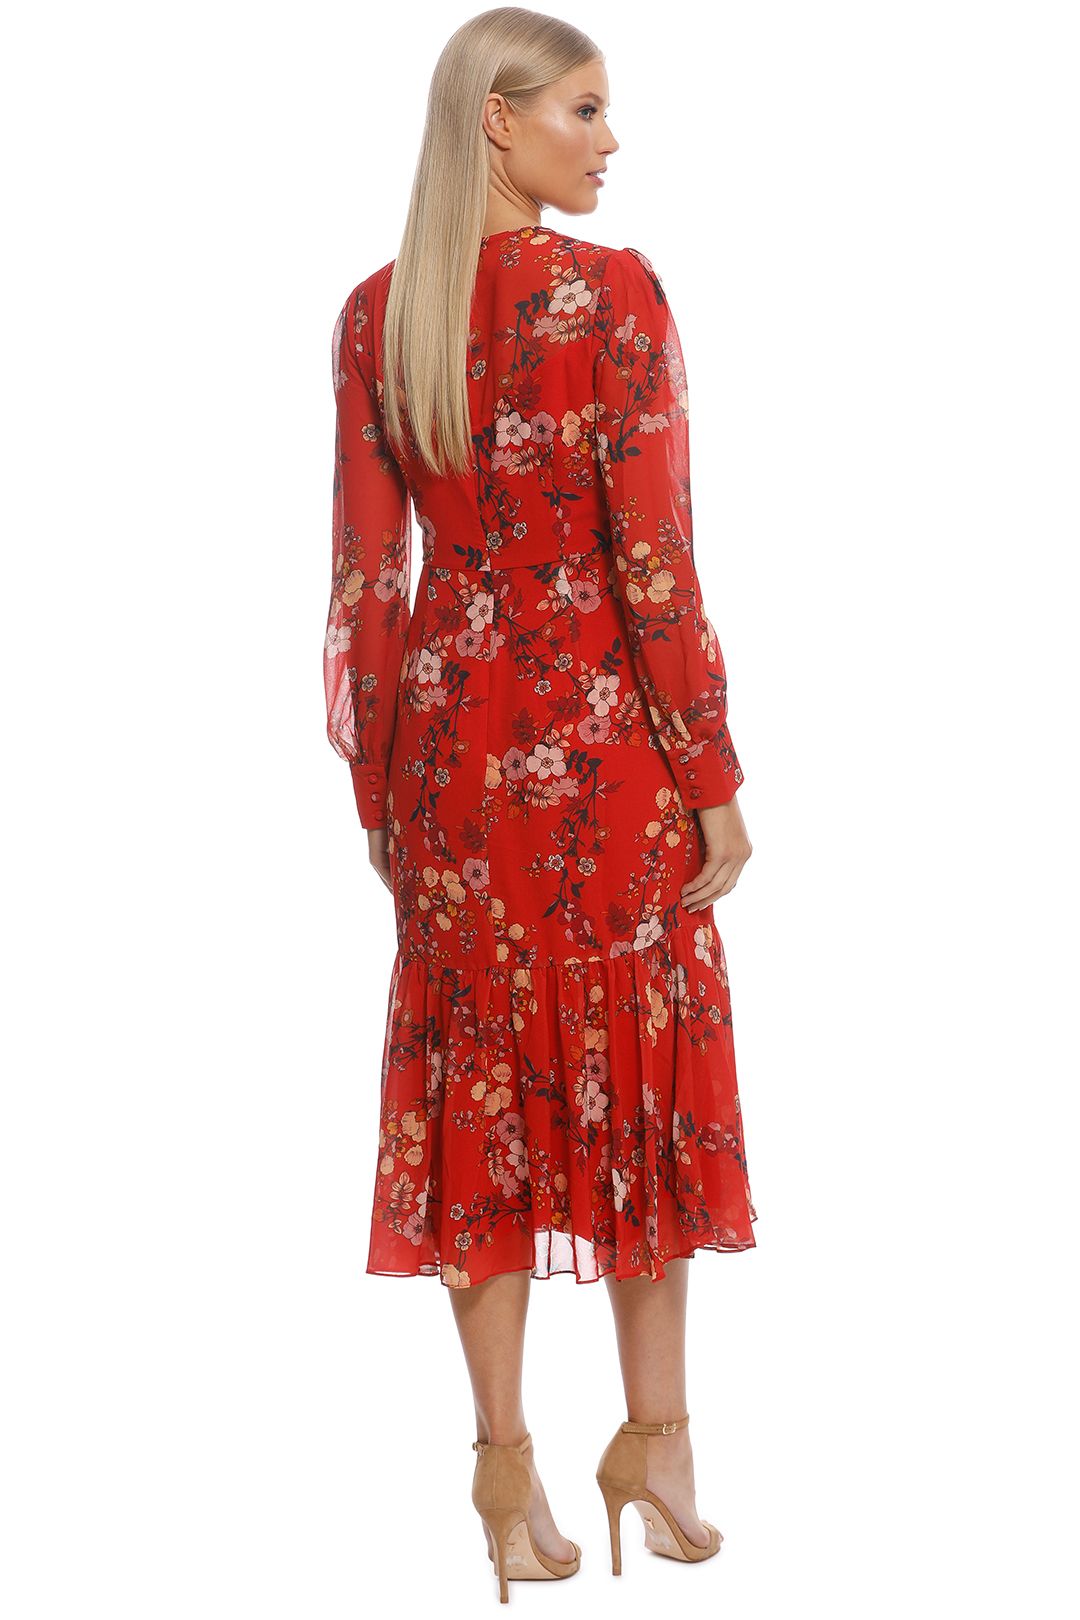 Cooper St - Disco Long Sleeve Fitted Midi Dress - Red - Back